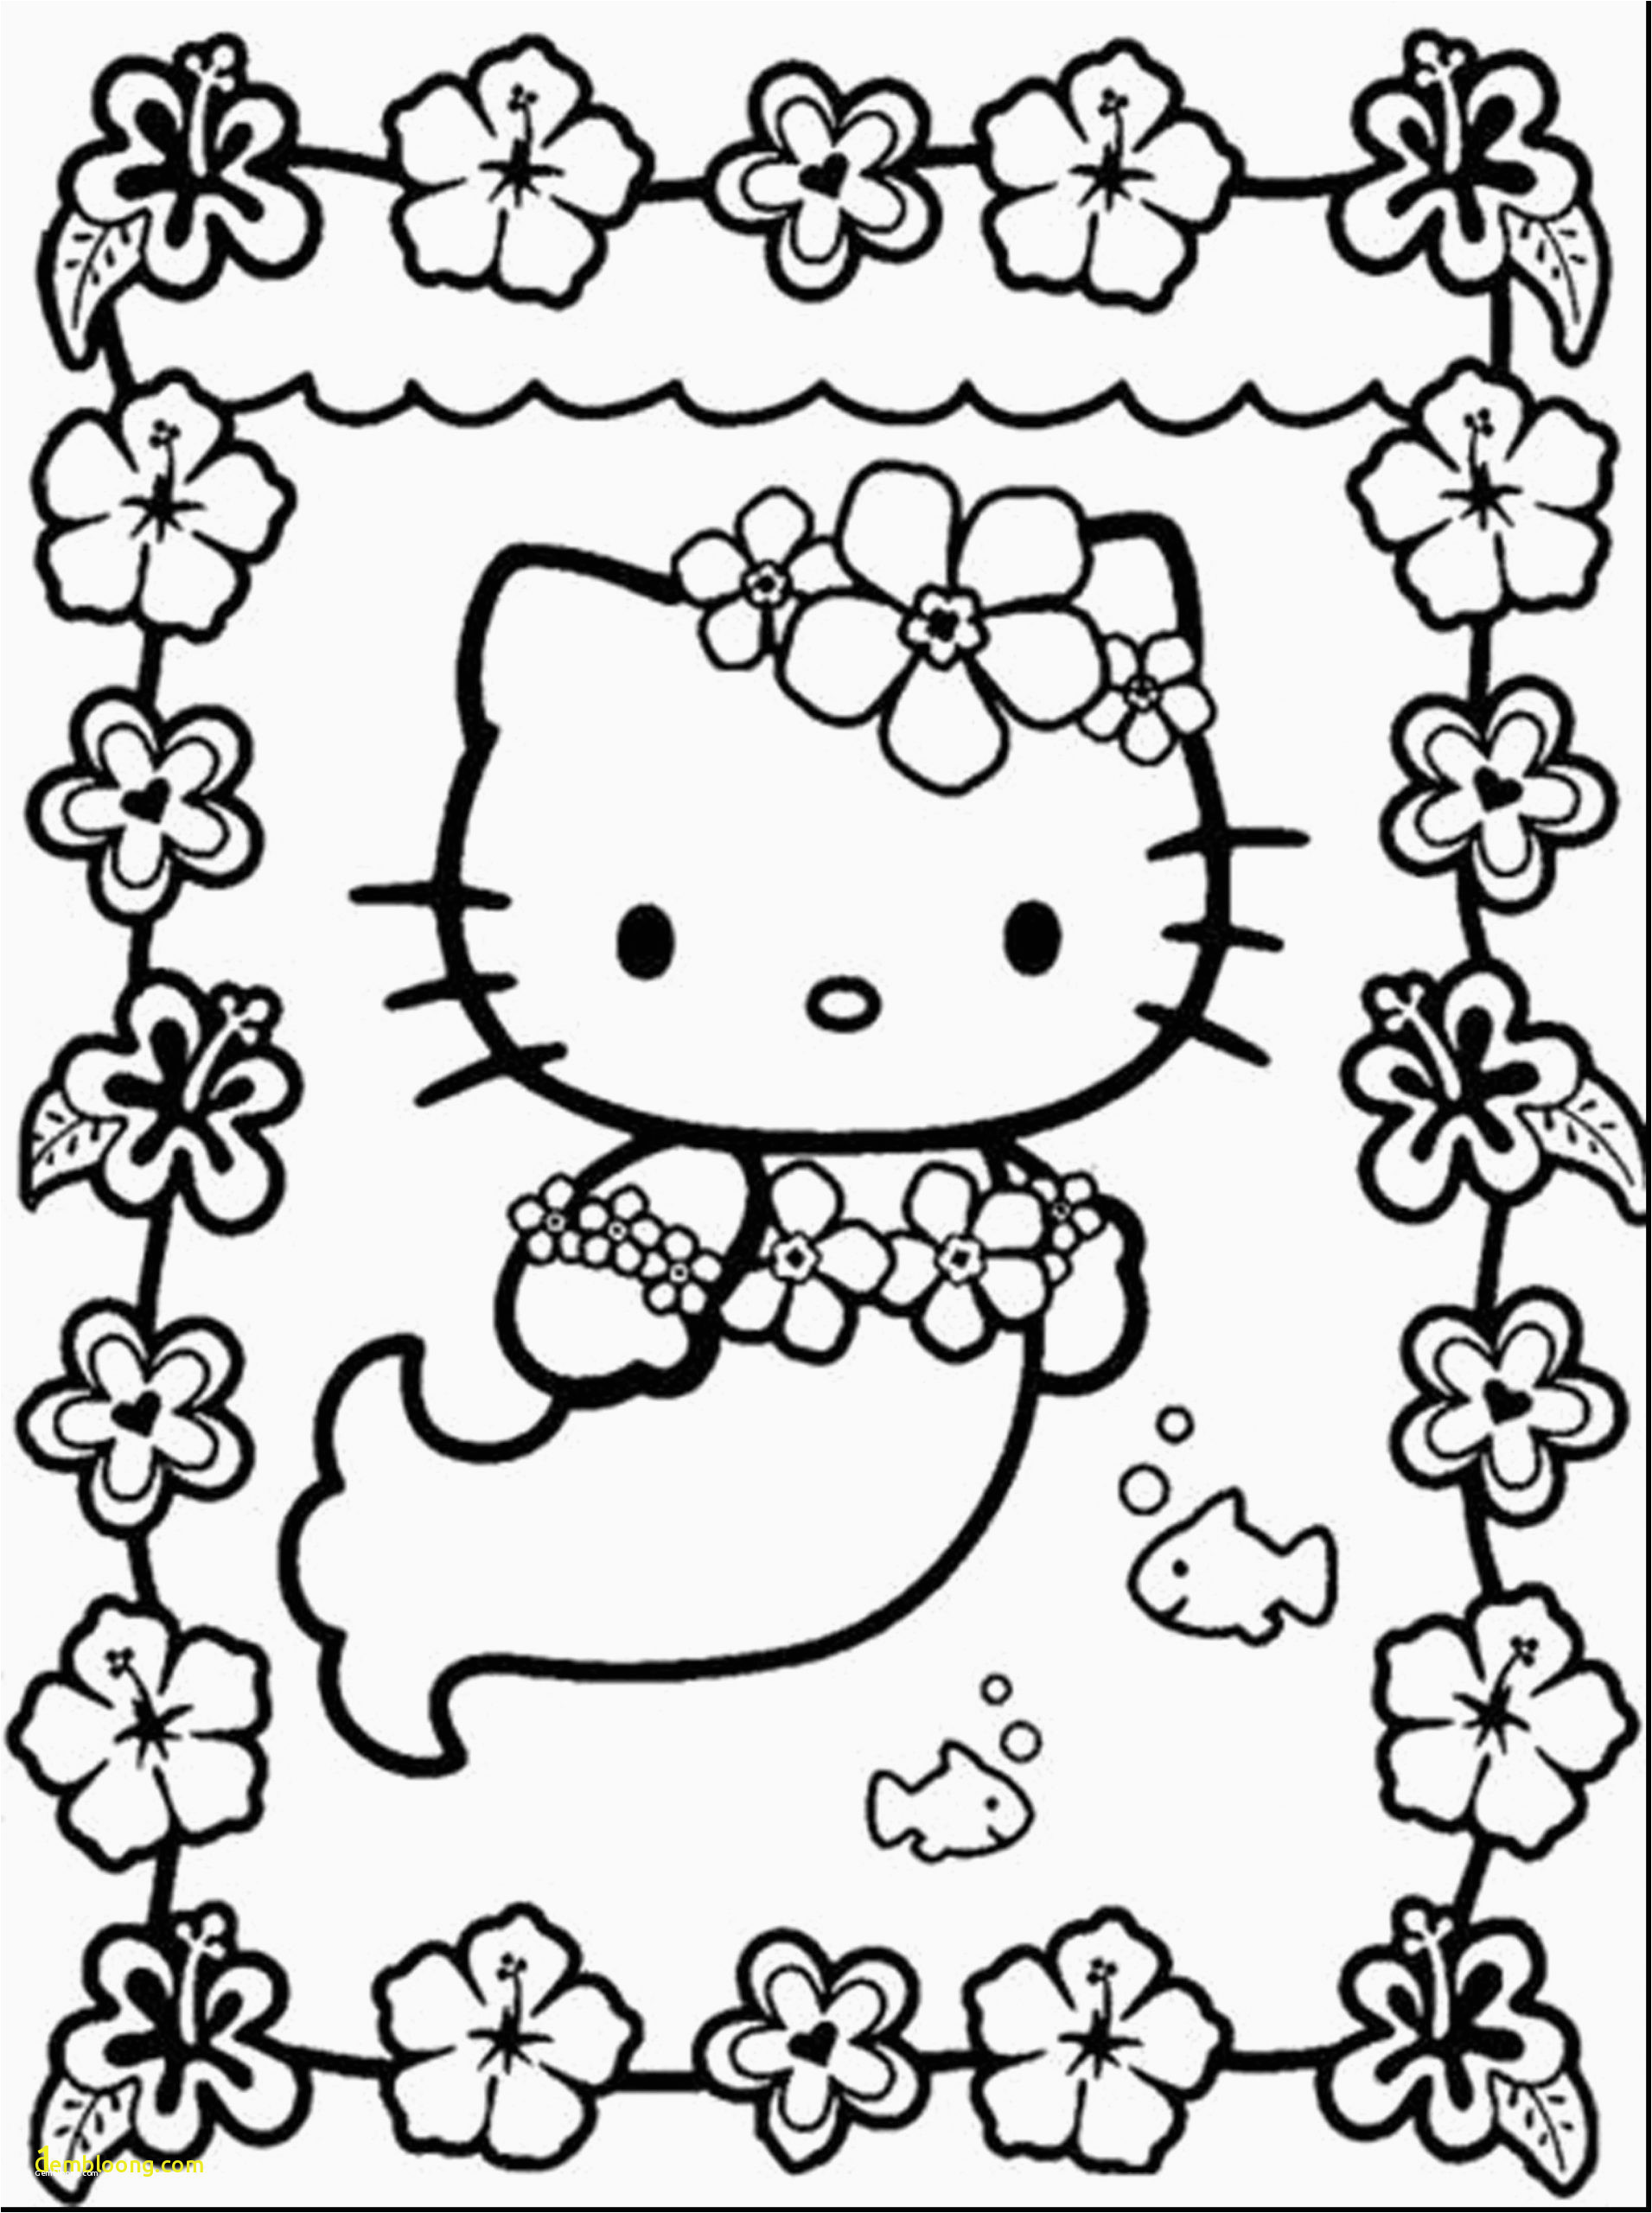 hello kitty mermaid coloring pages awesome free minnie mouse svg tags free minnie mouse printables of hello kitty mermaid coloring pages